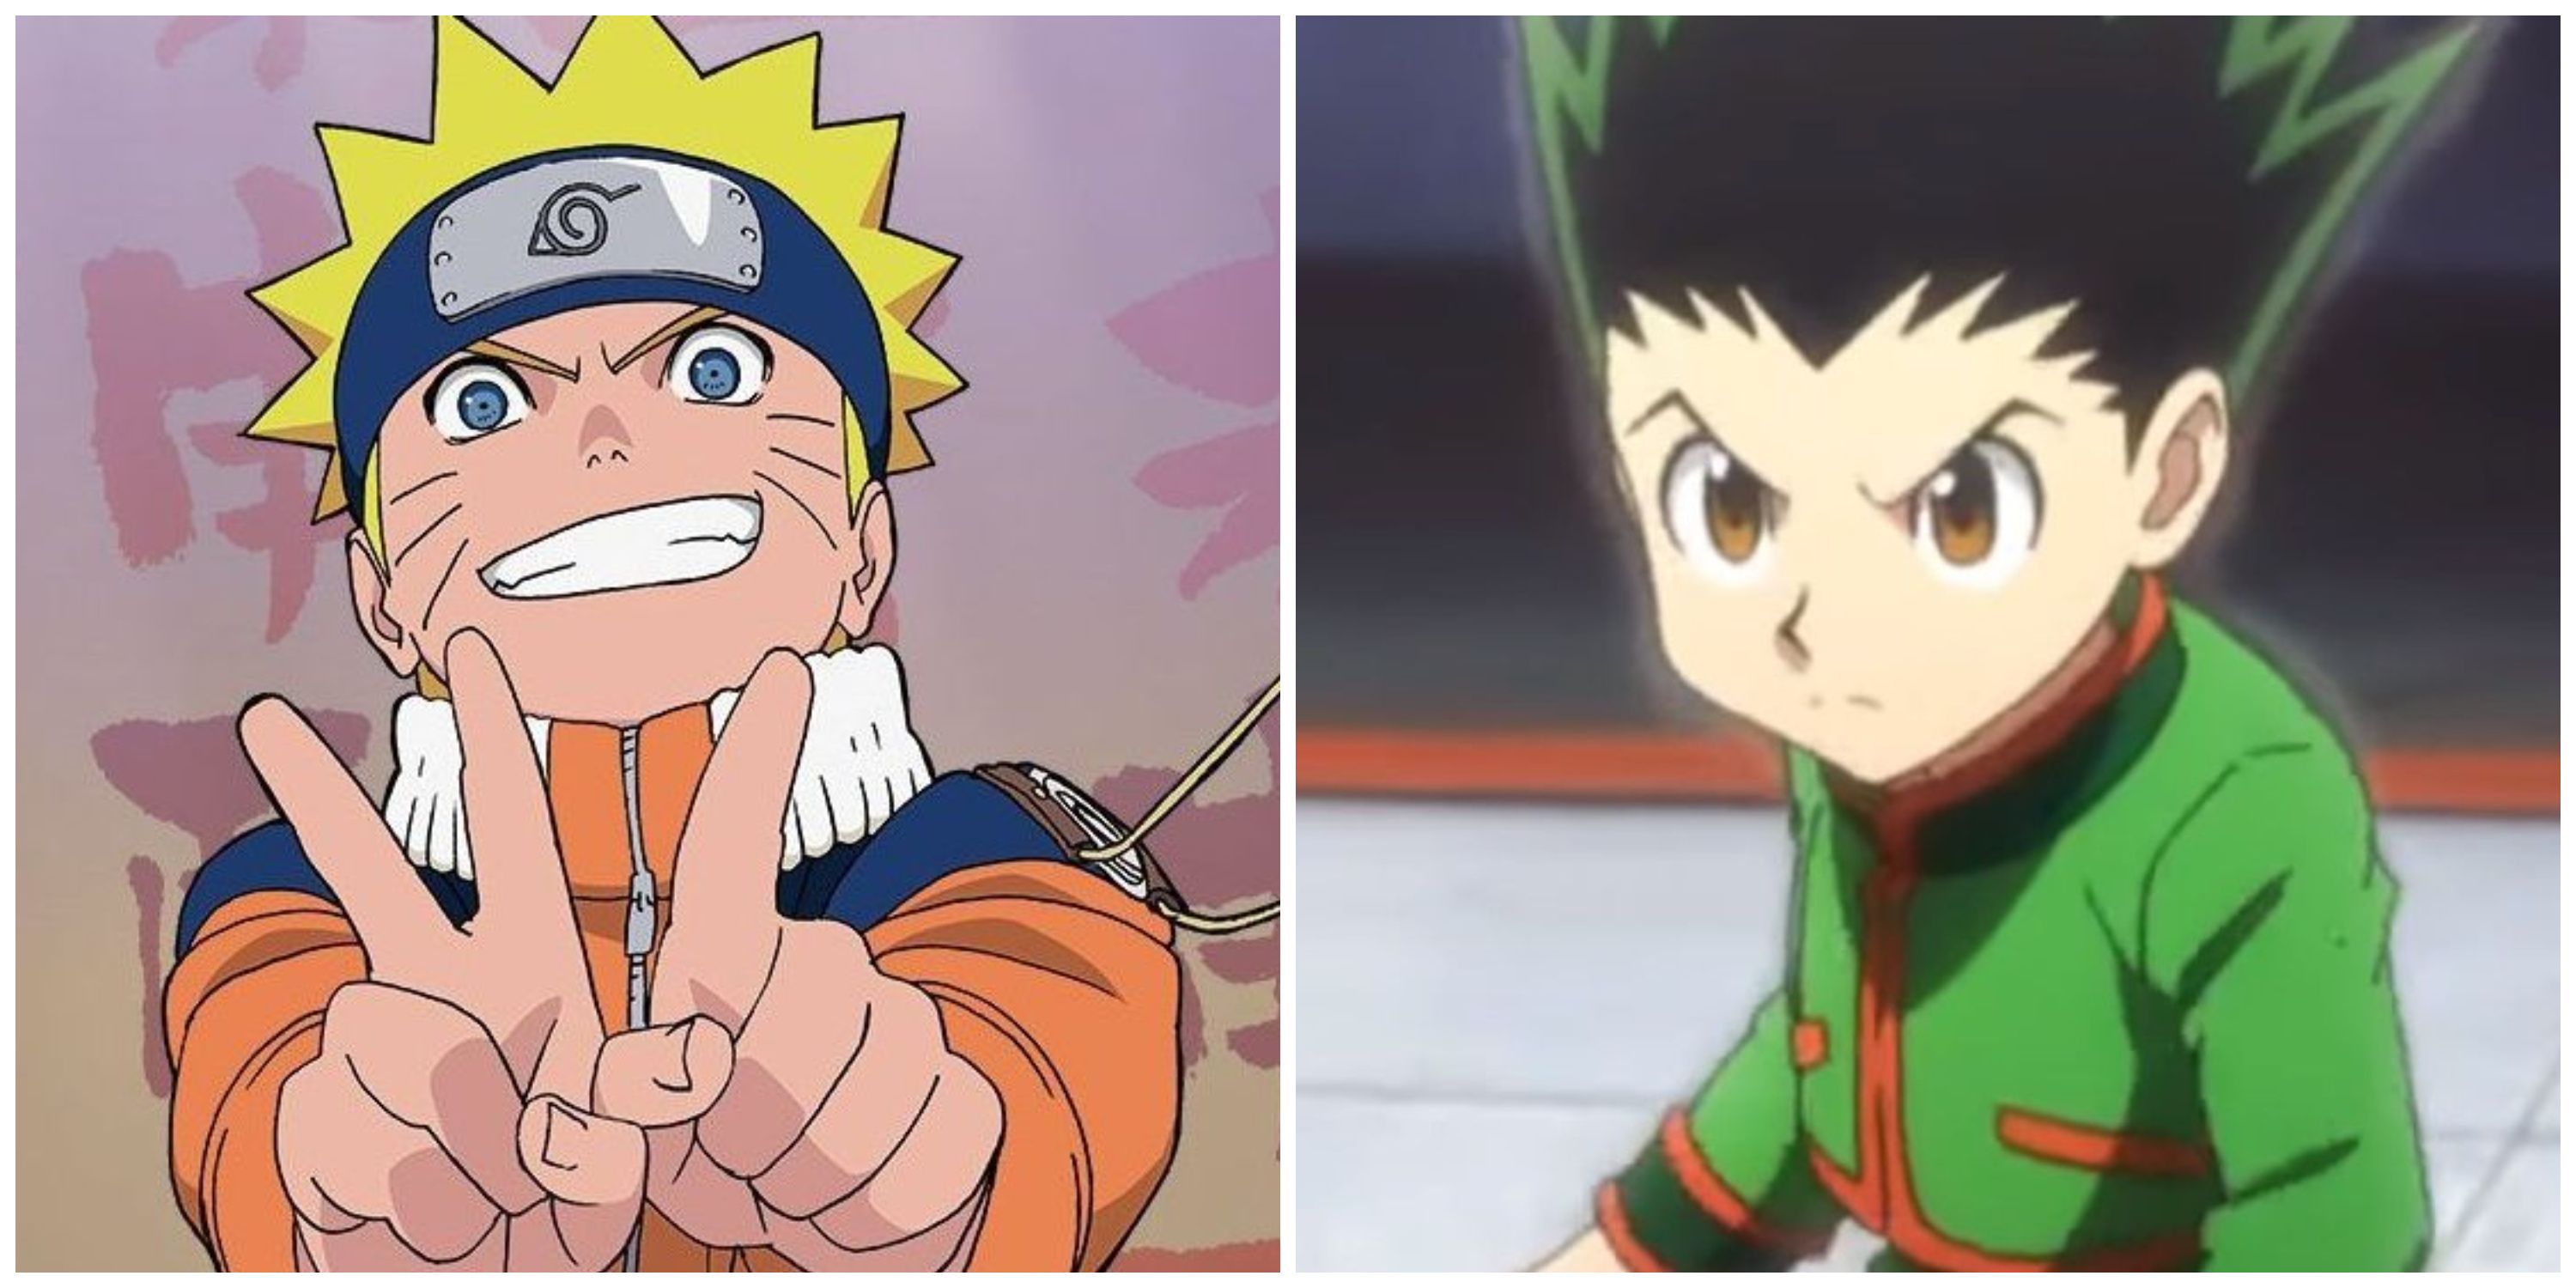 Youngest Action Shonen Anime Protagonists